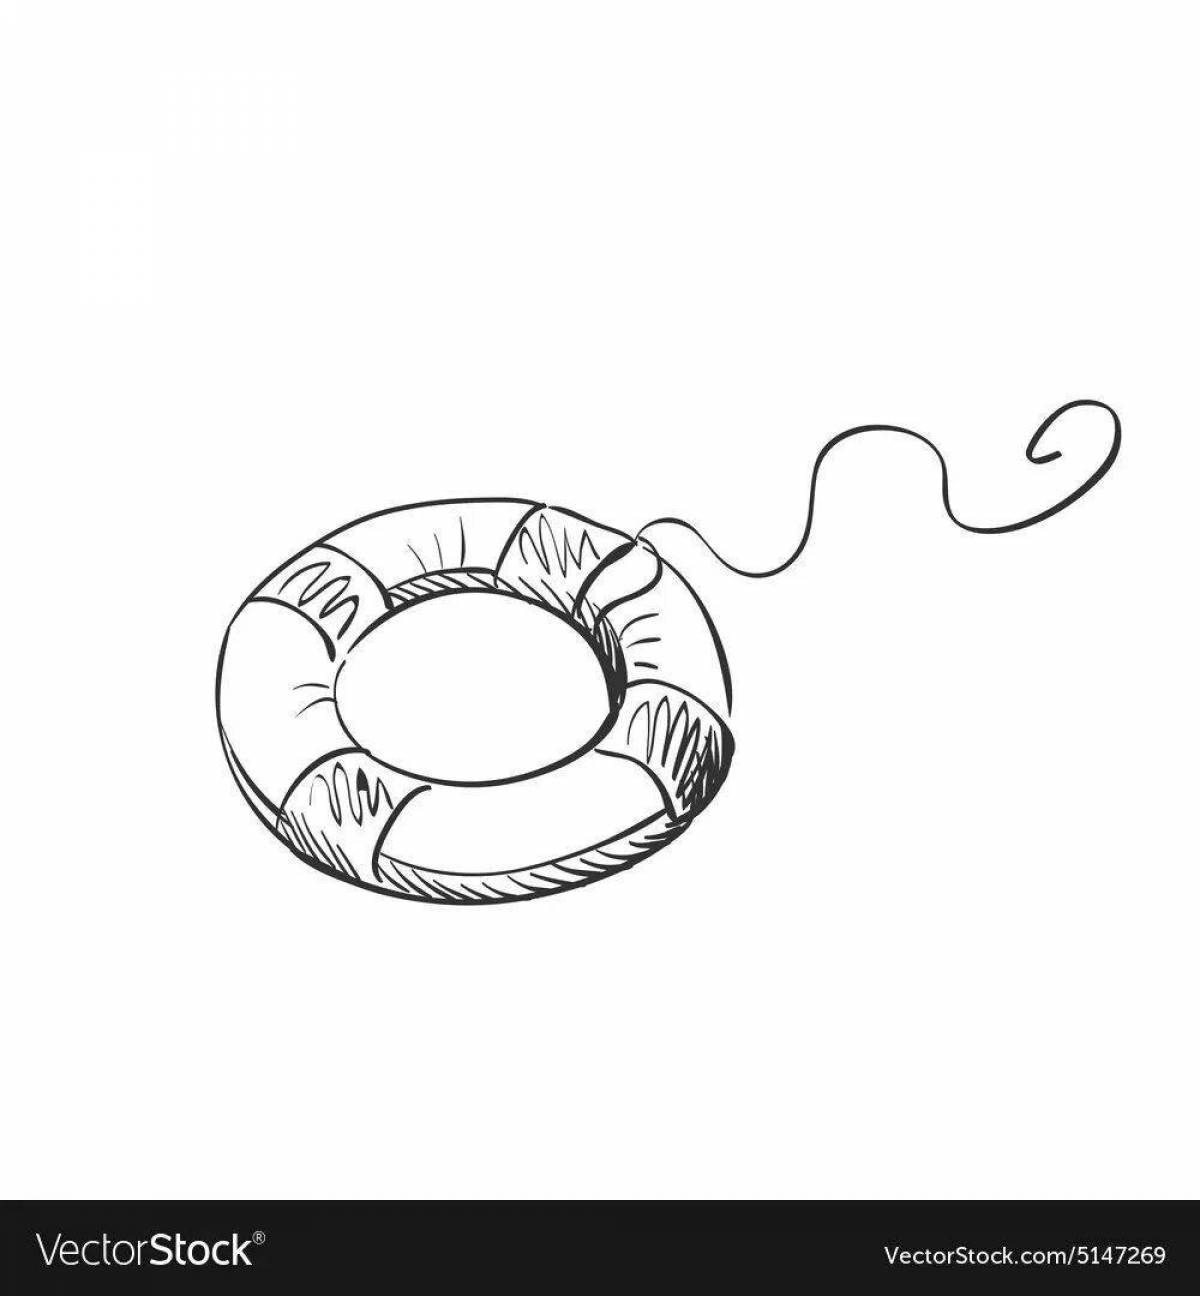 Playful lifebuoy coloring page